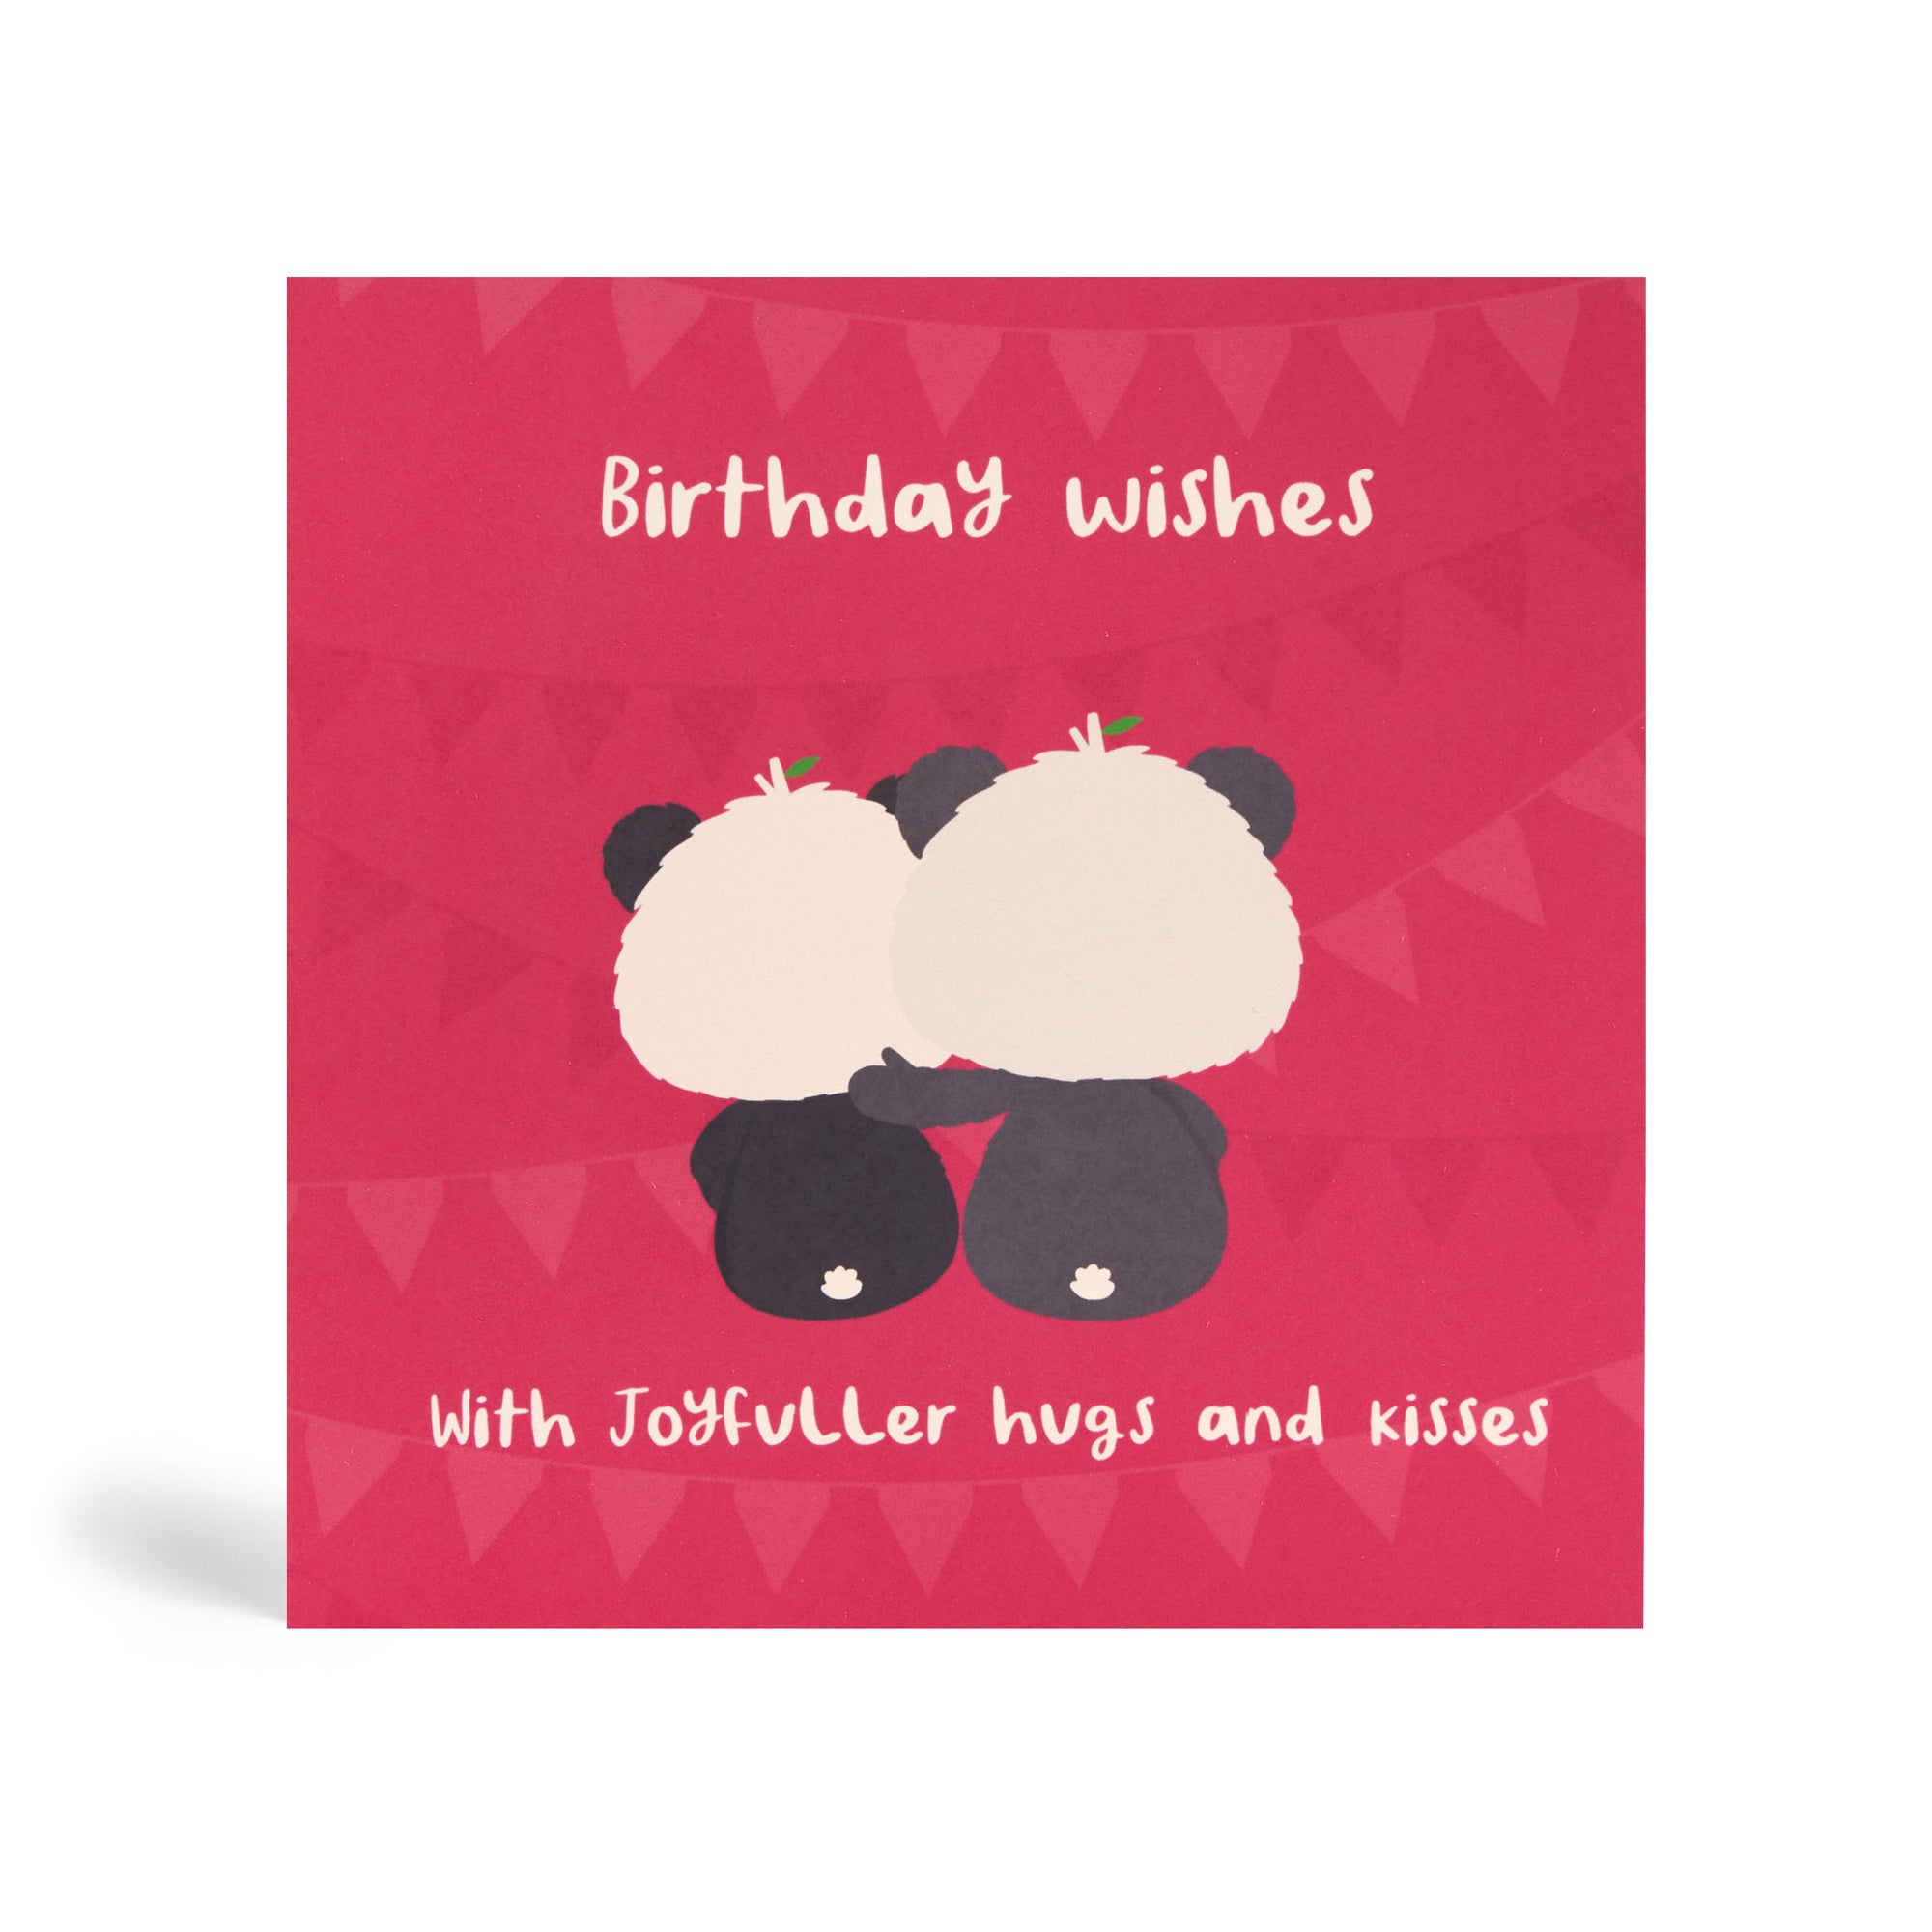 150mm square red eco-friendly, tree free, greeting card with two Pandas sharing Birthday Wishes with joyfuller Hugs and Kisses.